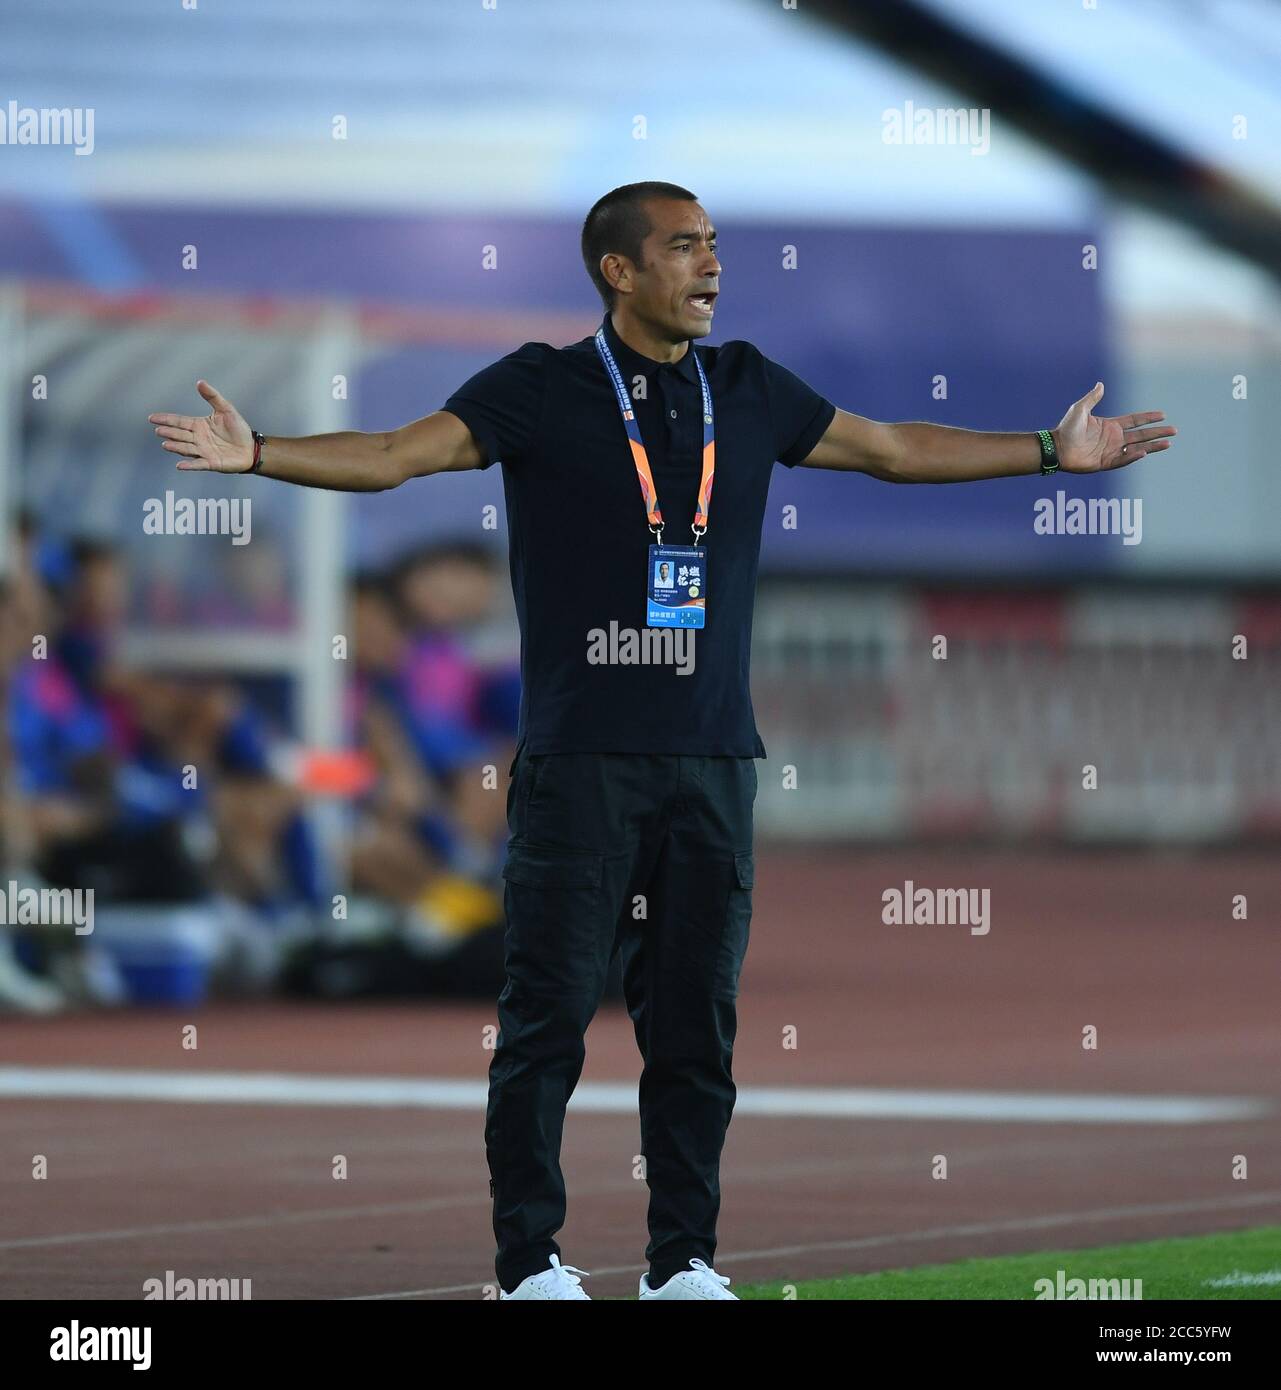 (200819) -- DALIAN, Aug. 19, 2020 (Xinhua) -- Giovanni van Bronckhorst, head coach of Guangzhou R&F, gestures during the 6th round match between Shanghai Greenland Shenhua and Guangzhou R&F at the postponed 2020 season Chinese Football Association Super League (CSL) Dalian Division in Dalian, northeast China's Liaoning Province, Aug. 19, 2020. (Xinhua/Long Lei) Stock Photo